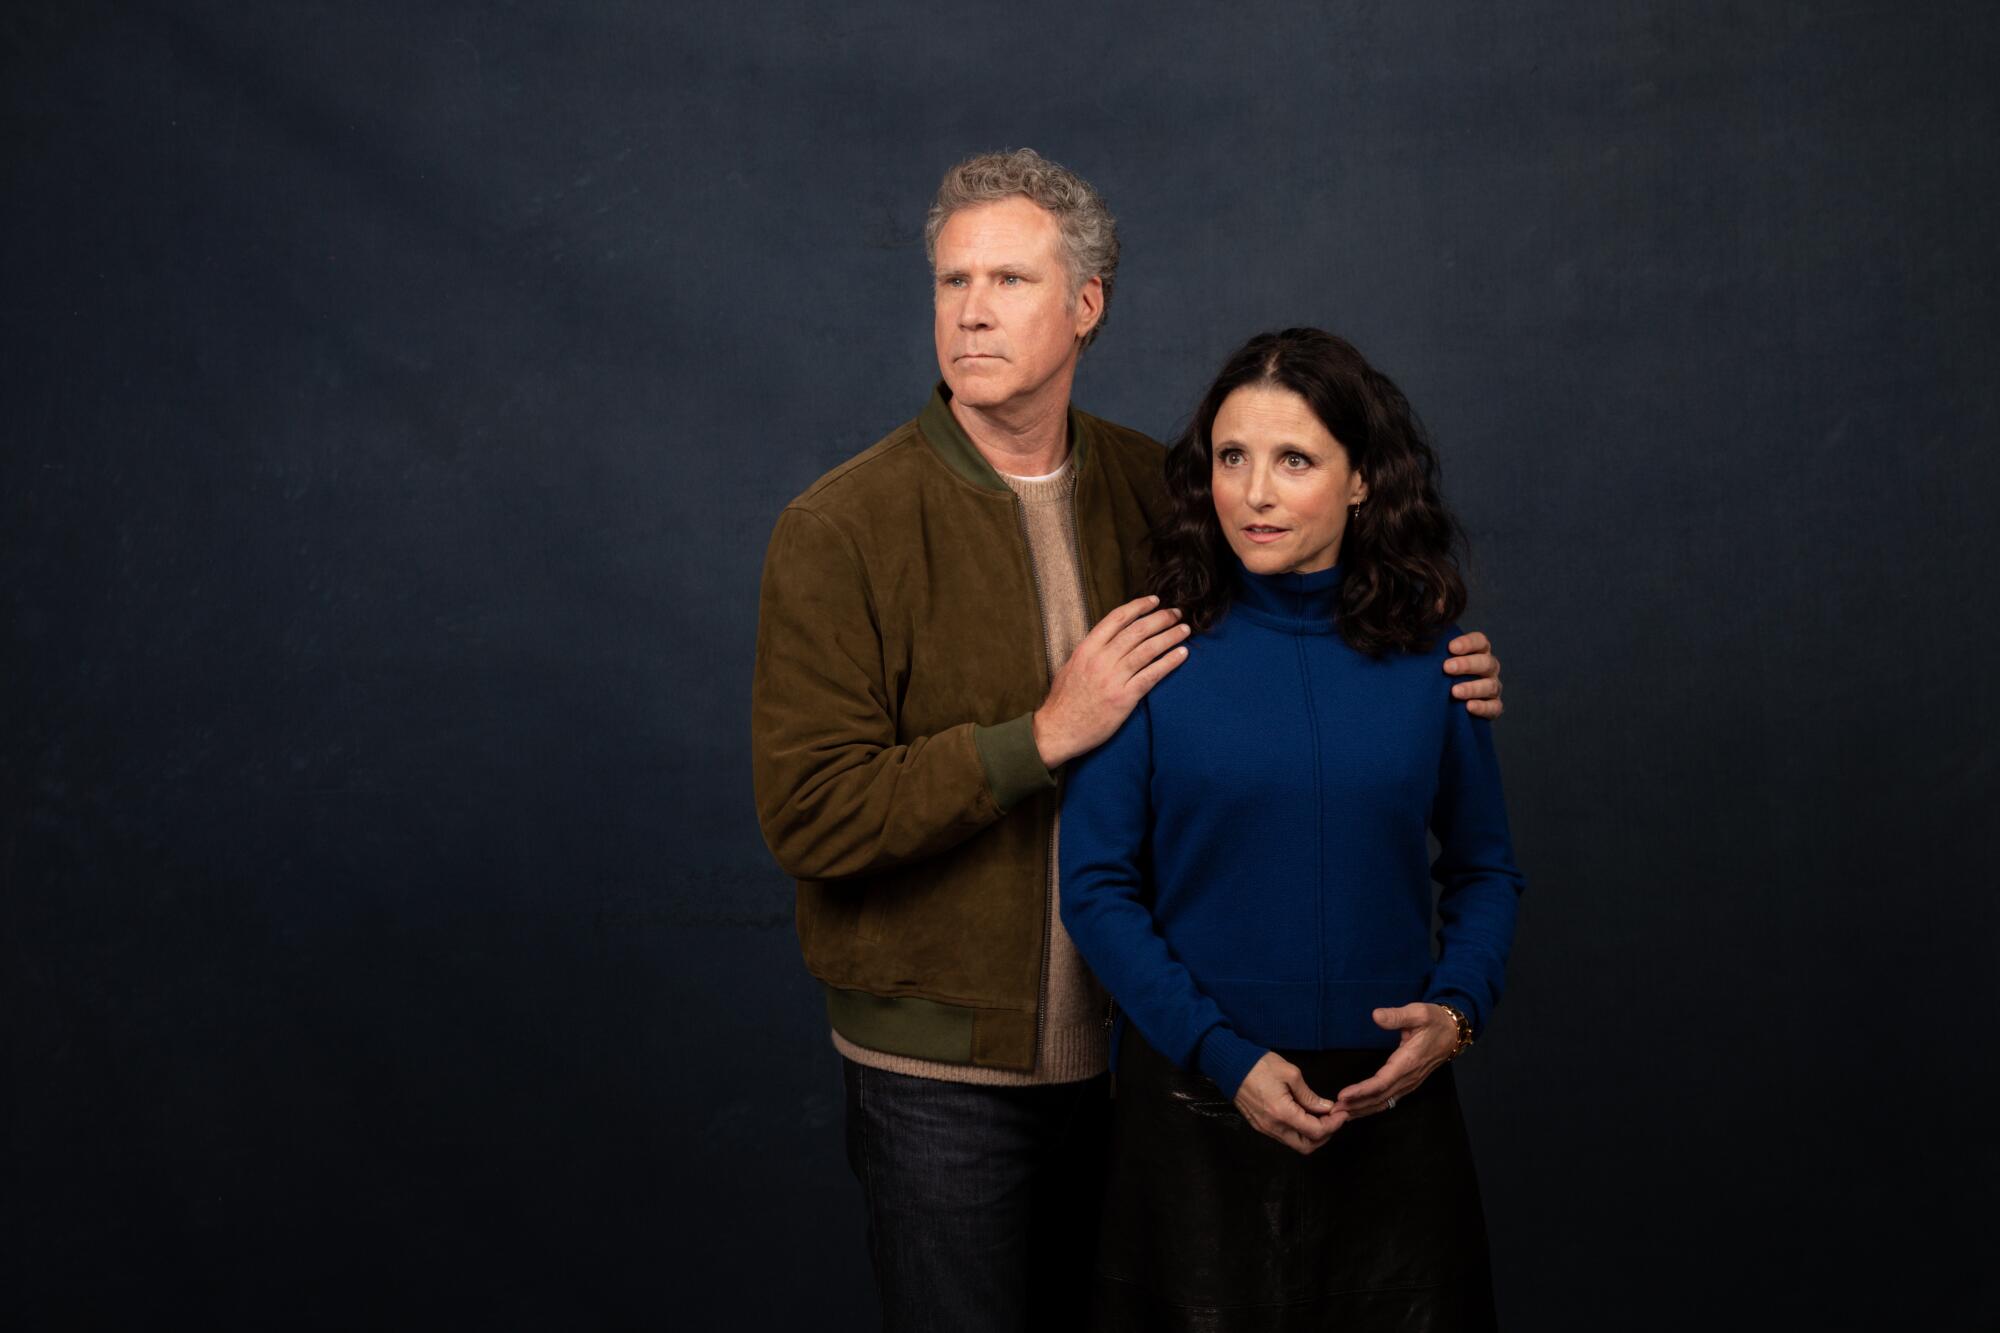 Will Ferrell and Julia Louis-Dreyfus of “Downhill,” photographed in the L.A. Times Studio at the Sundance Film Festival.